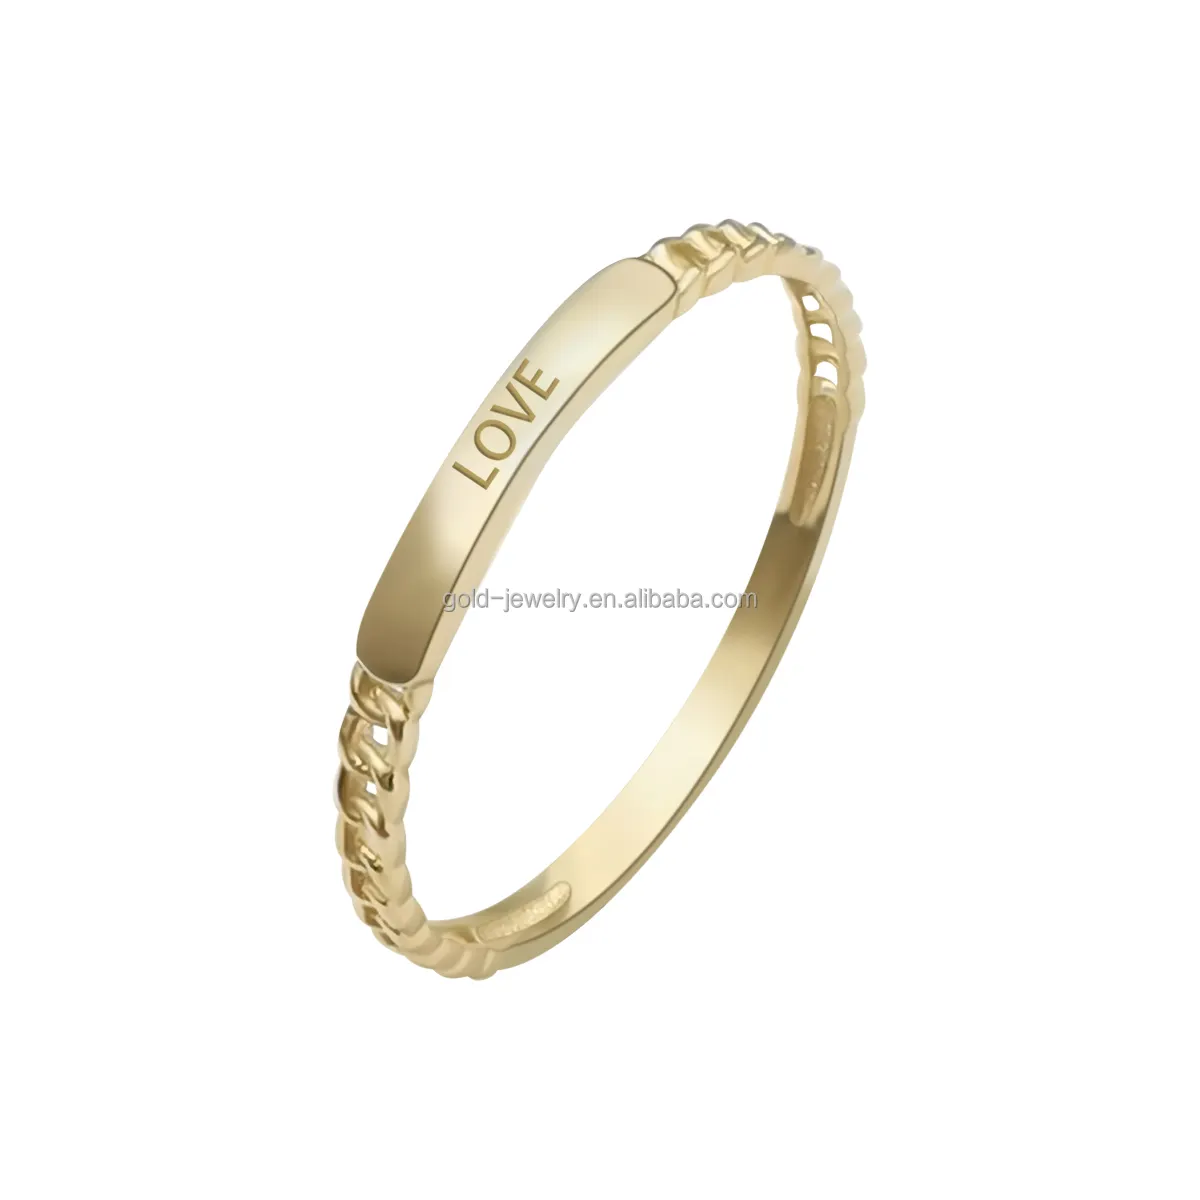 Gold Love Letter Chain Design Women Ring Fashion Gift 9K 14K Real Gold Fashion Jewelry Finger Ring Engagement Bands or Rings